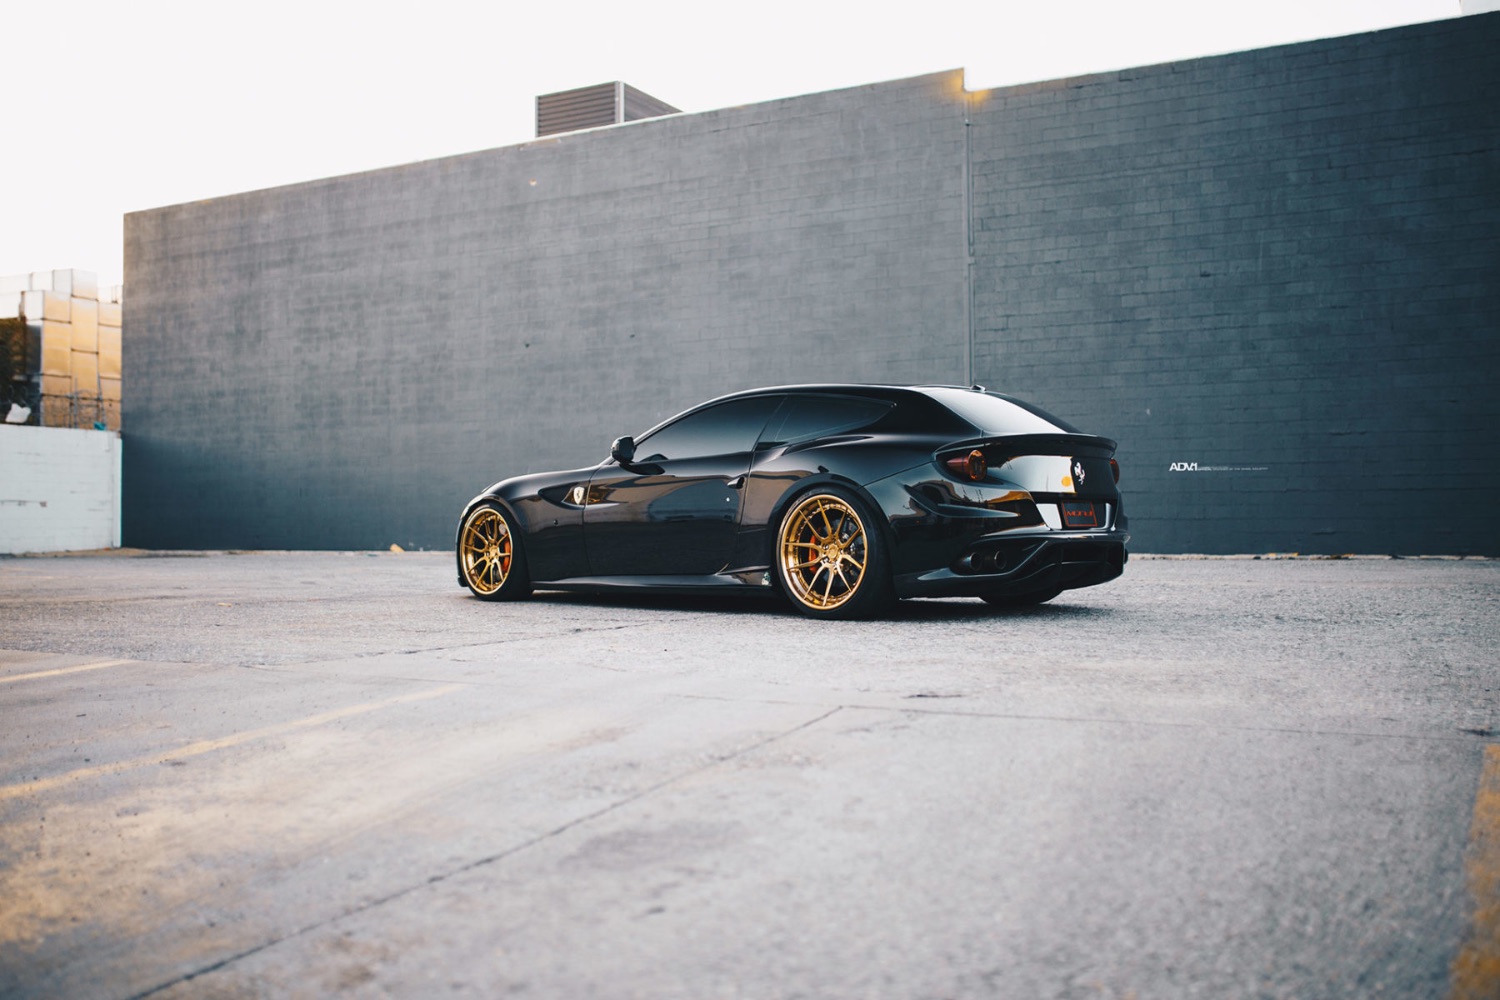 gold-concave-wheels-ferrari-ff-four-seater-aftermarket-modified-g